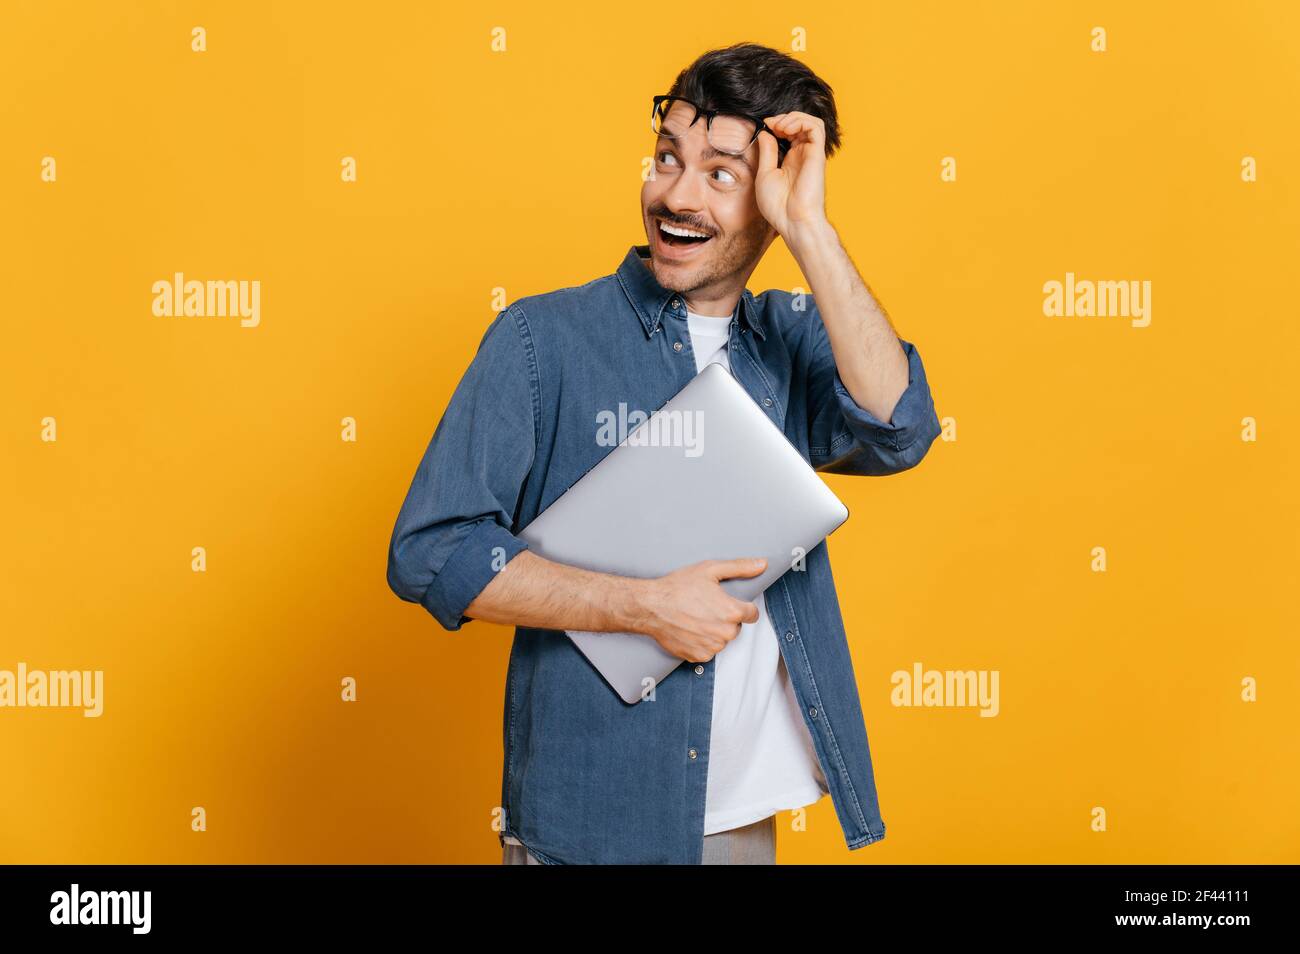 Amazed excited handsome stylish smart guy in glasses and in denim shirt, holds a laptop at hand, looks surprised towards empty space taking off glasses, smiling, isolated orange background, copy space Stock Photo